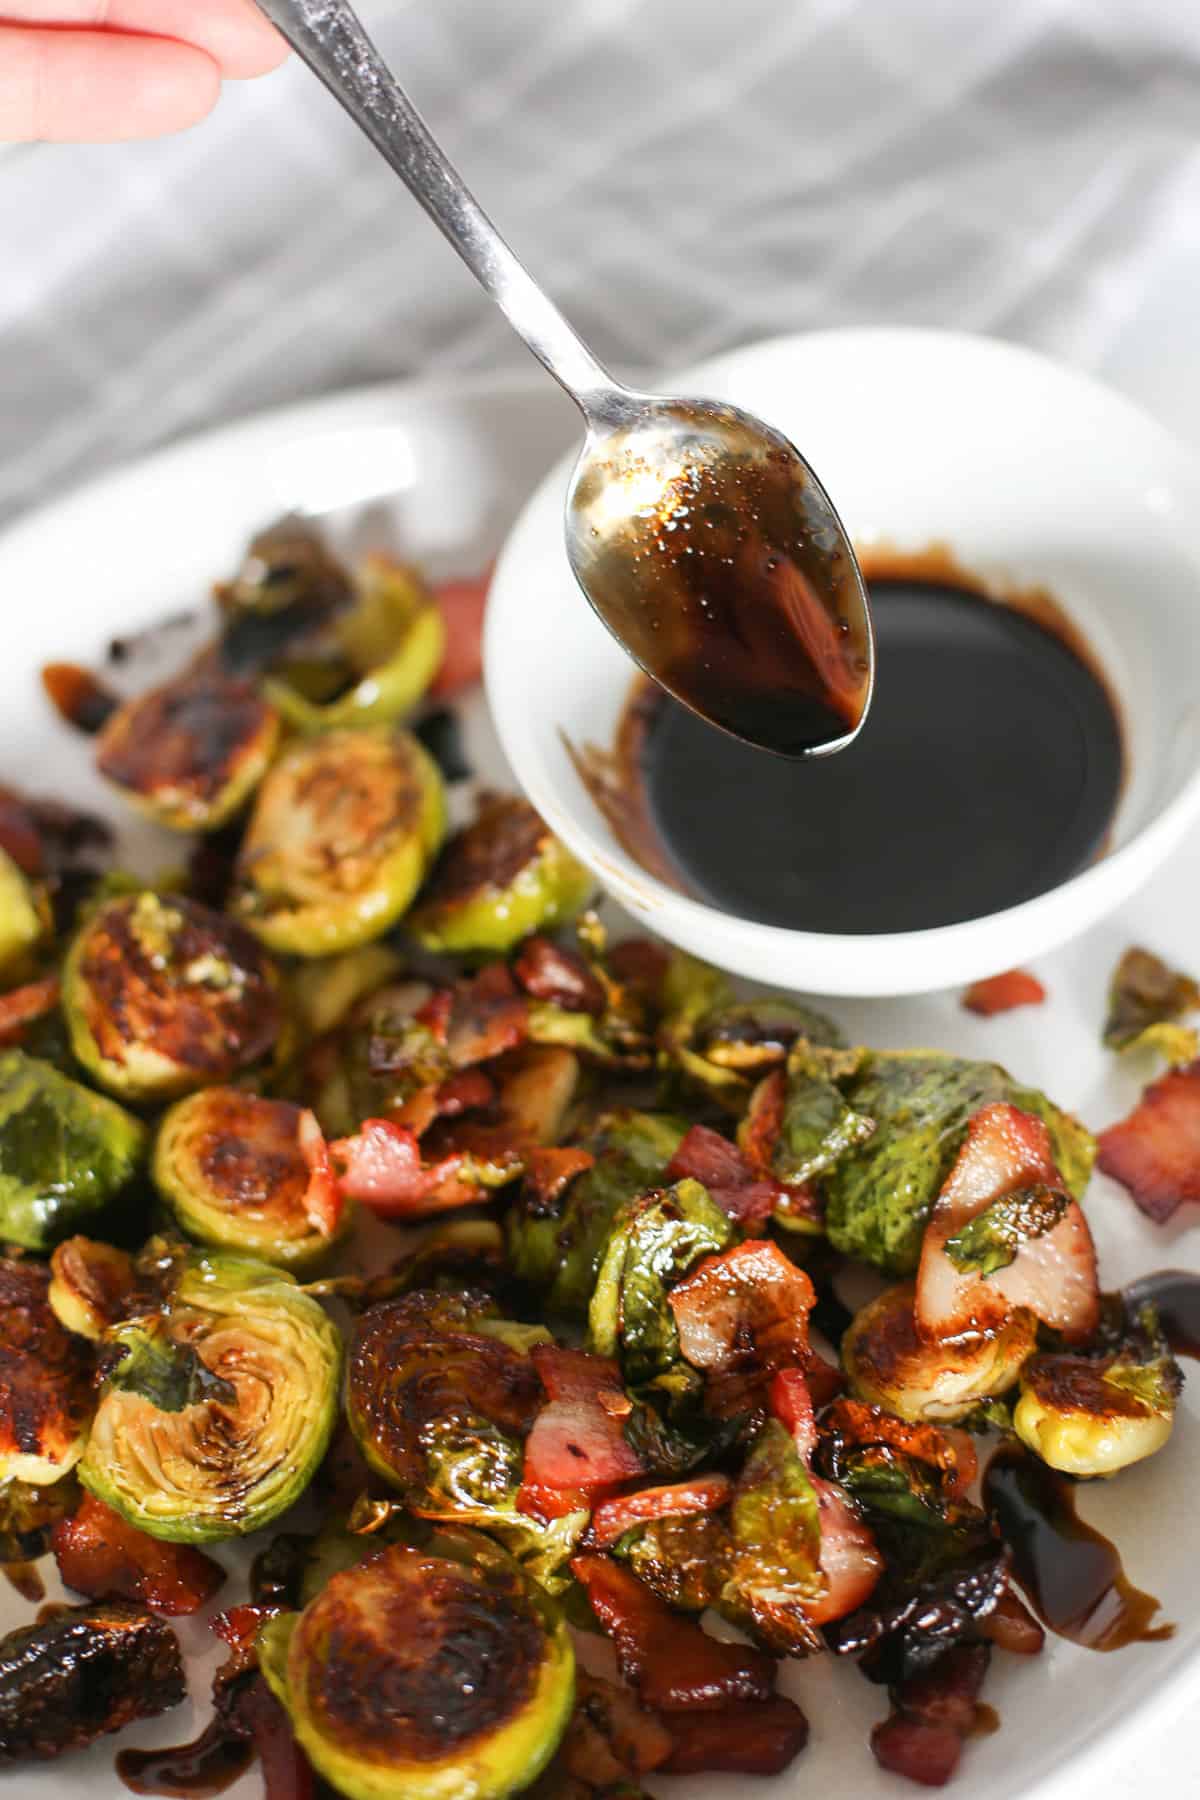 Honey balsamic Brussels sprouts on a white plate being drizzled with a balsamic reduction.